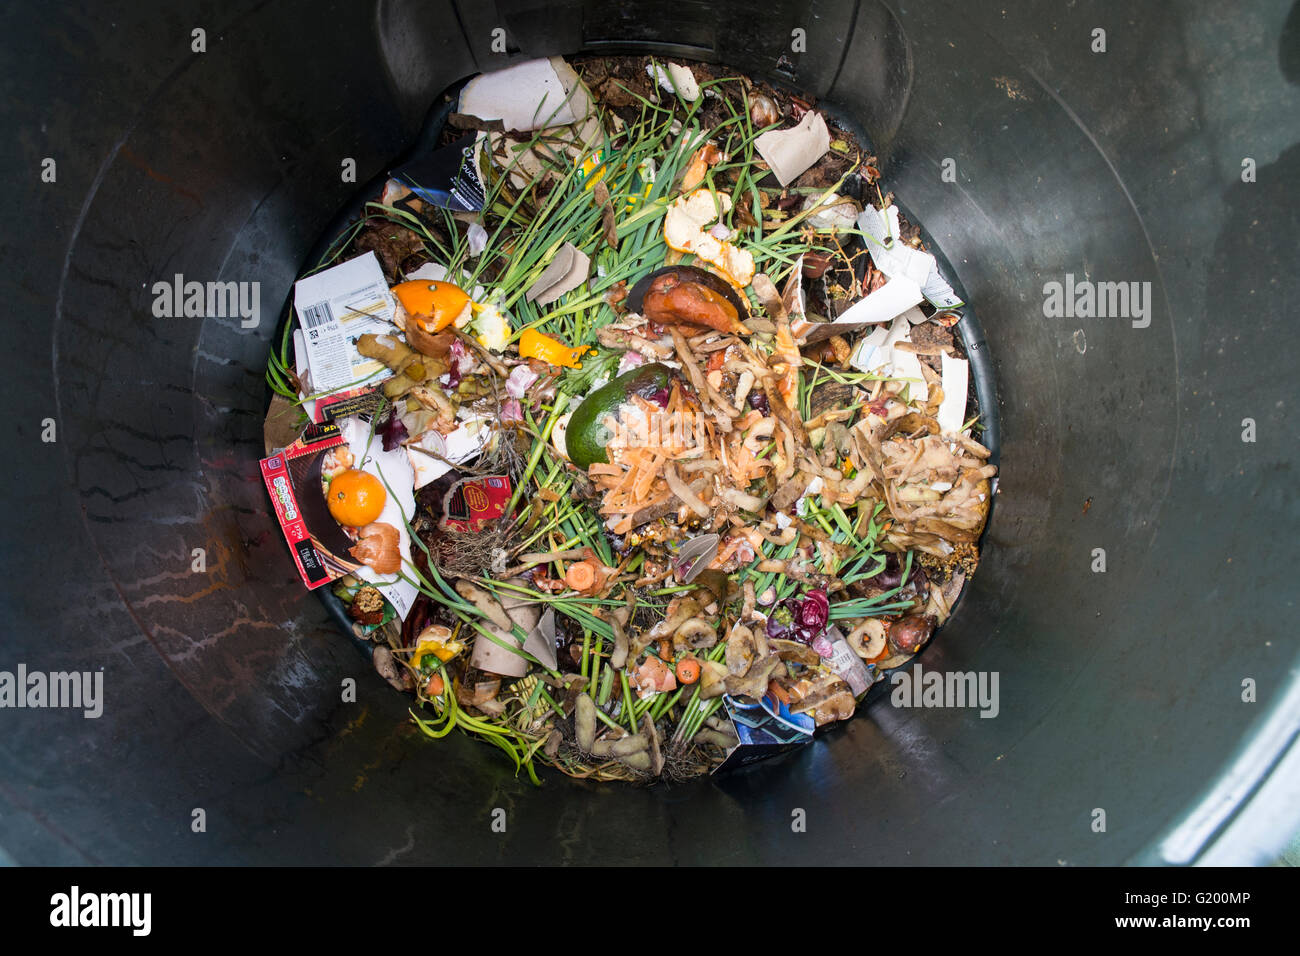 Interior of a plastic compost bin for home use with food scraps and garden waste inside Stock Photo